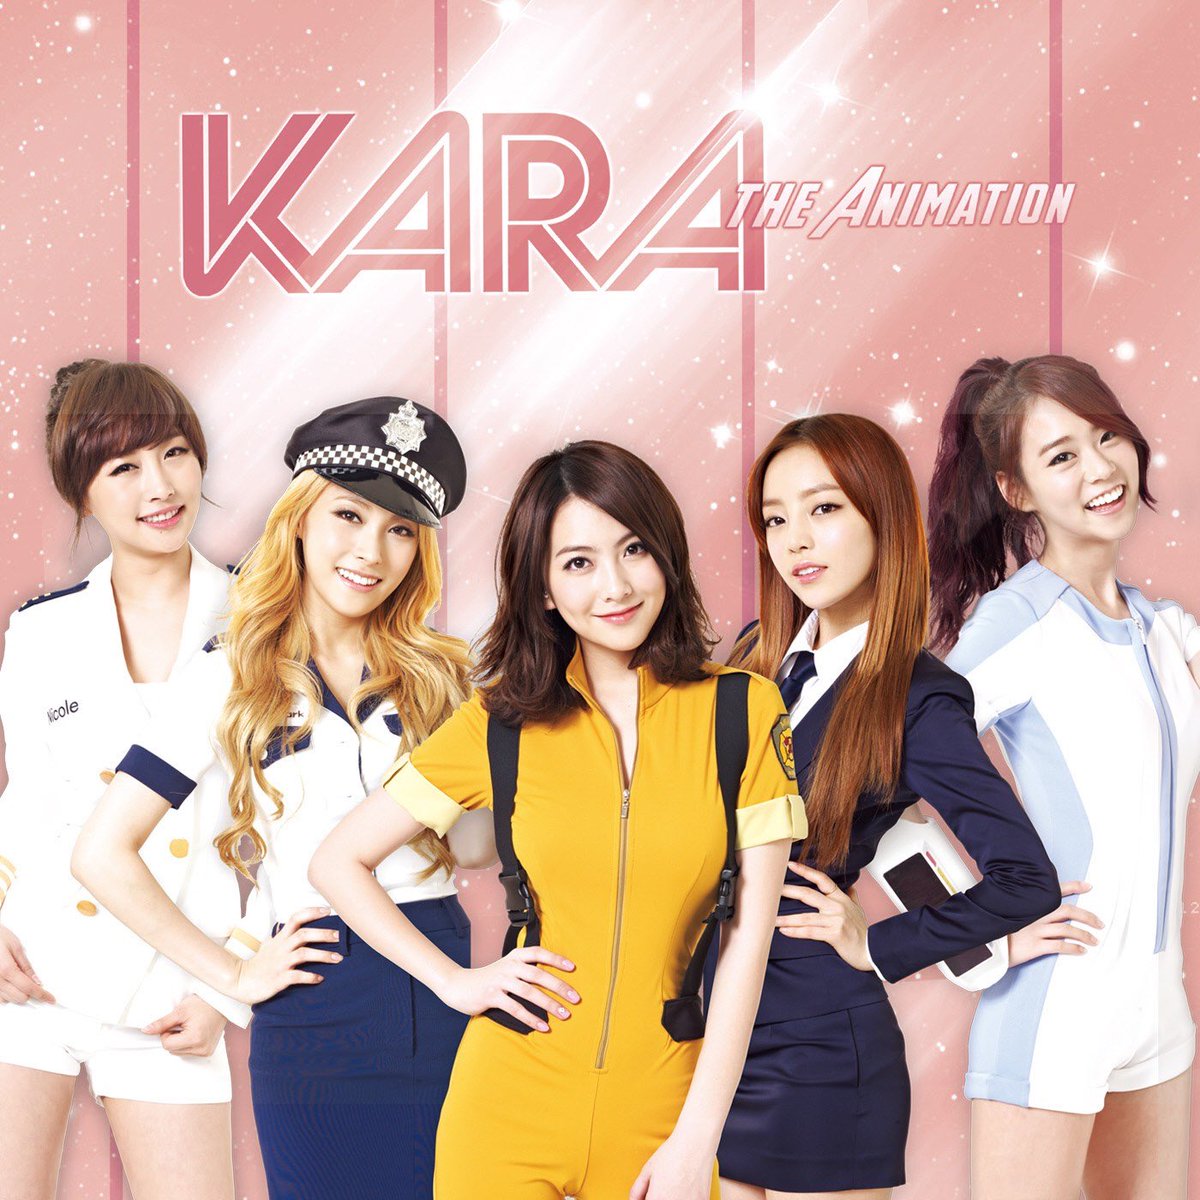 KARA was so successful that they even had an anime series for them (I cannot make this up). The show depicted the animated version of the members pursuing different careers.